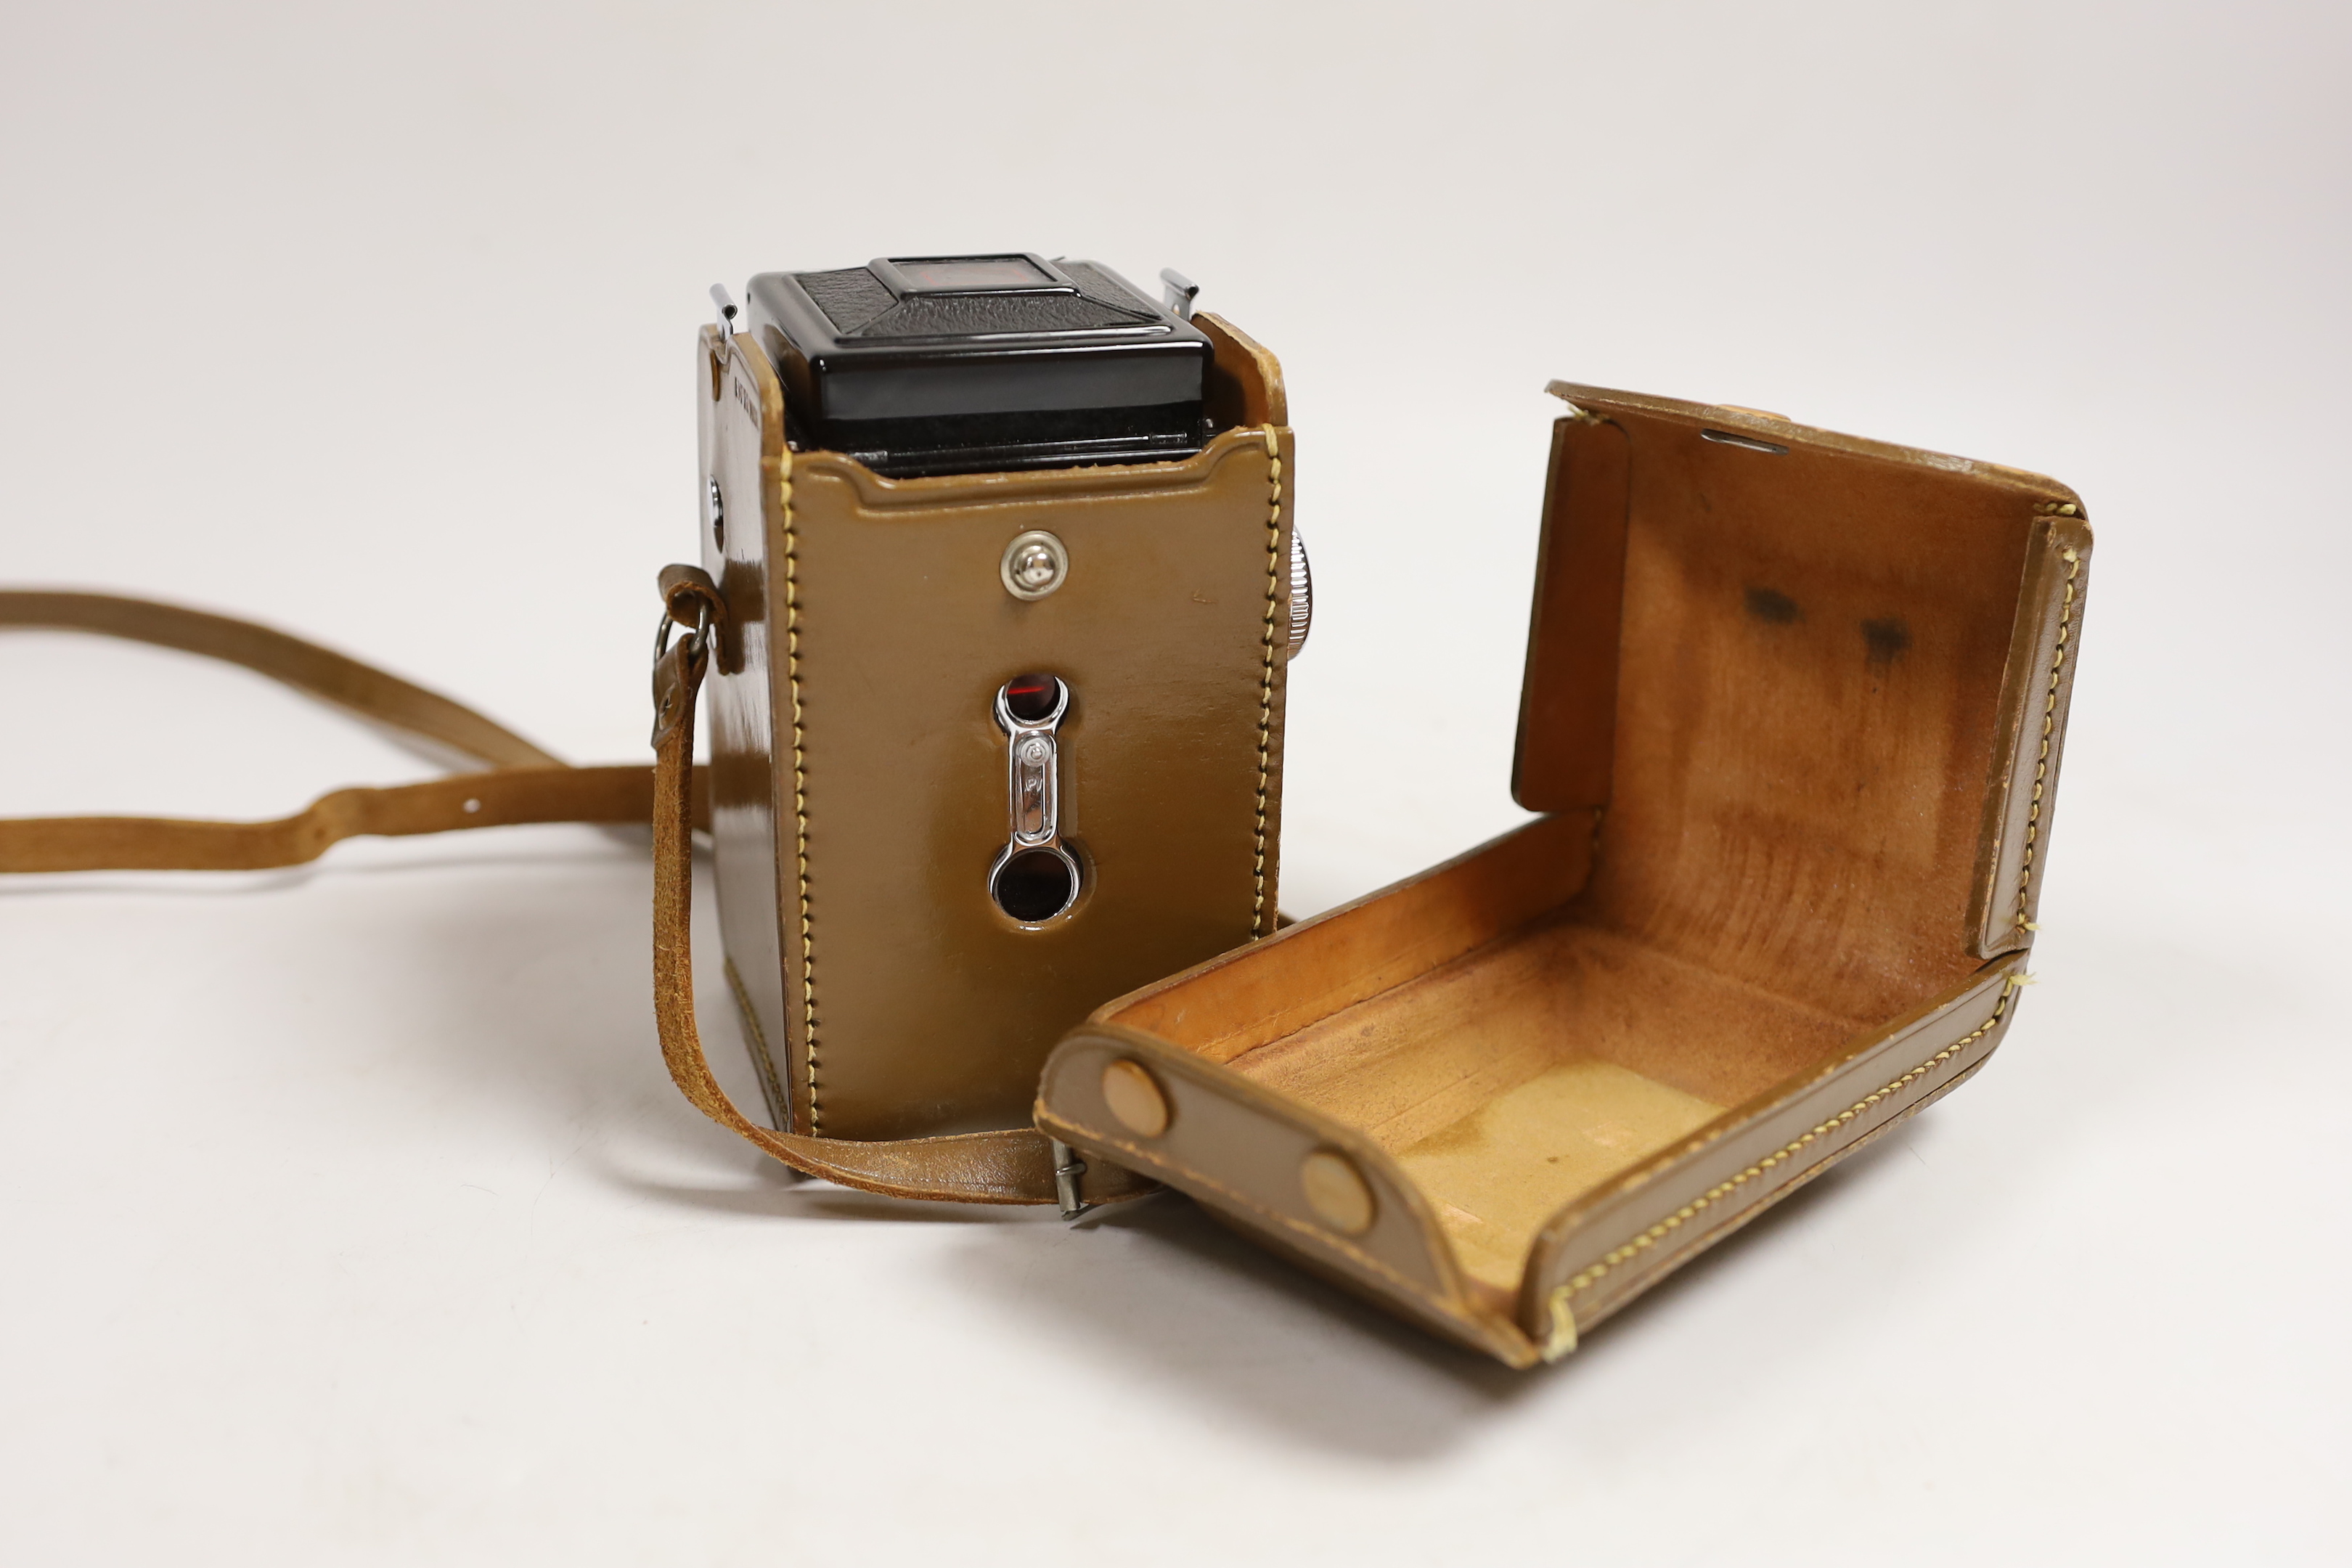 A Halina leather-cased camera, camera approx 14cm high